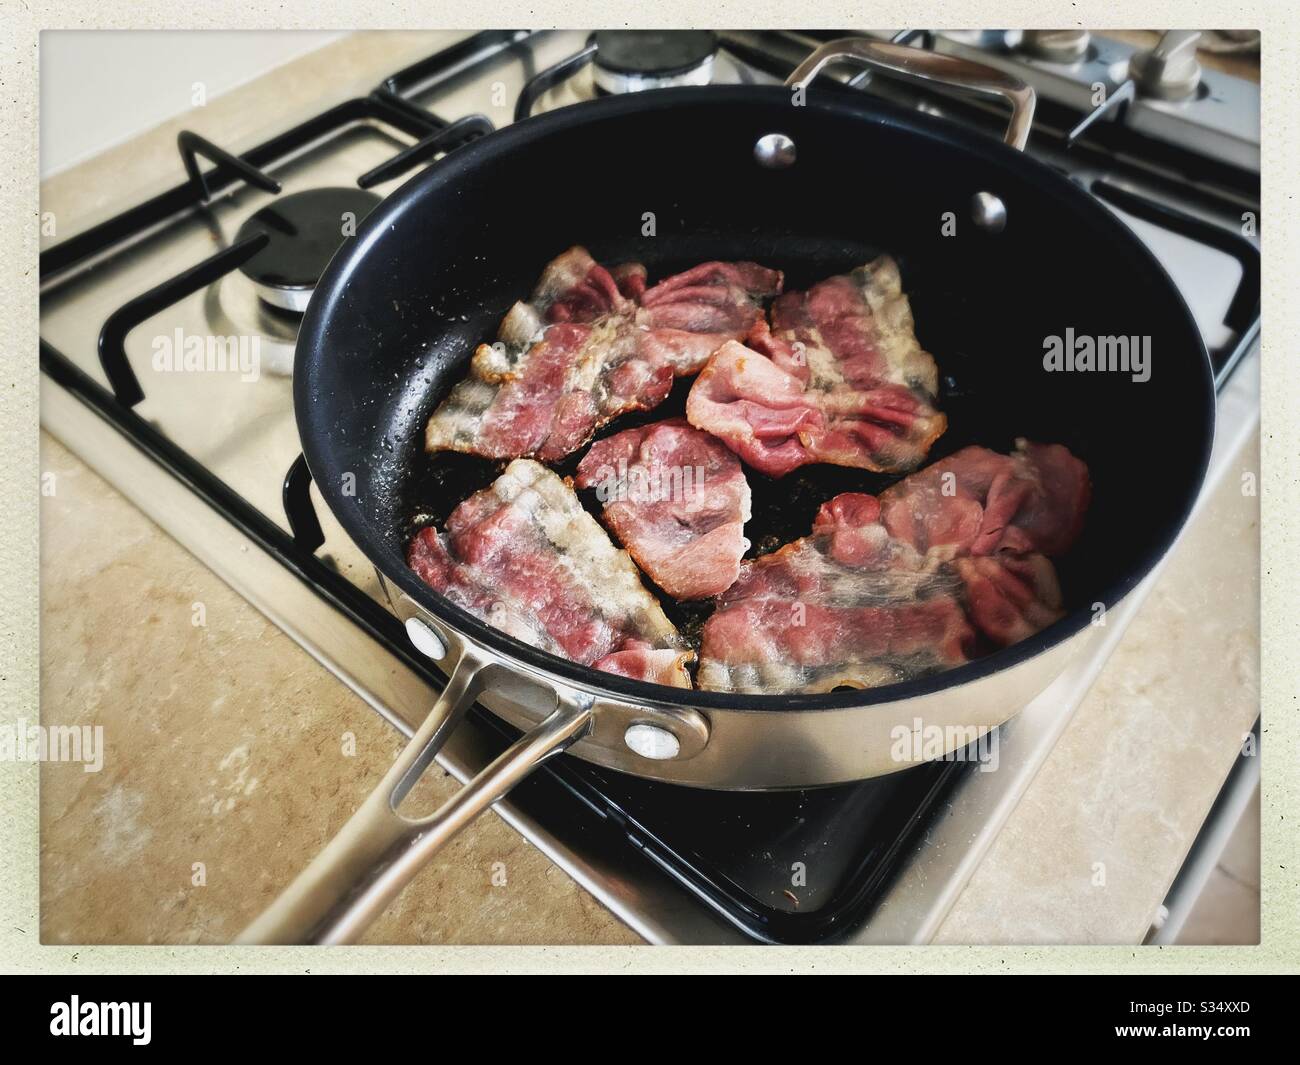 https://c8.alamy.com/comp/S34XXD/a-close-up-view-of-bacon-sizzling-in-the-frying-pan-on-a-stovetop-cooking-bacon-slices-for-breakfast-fry-up-S34XXD.jpg